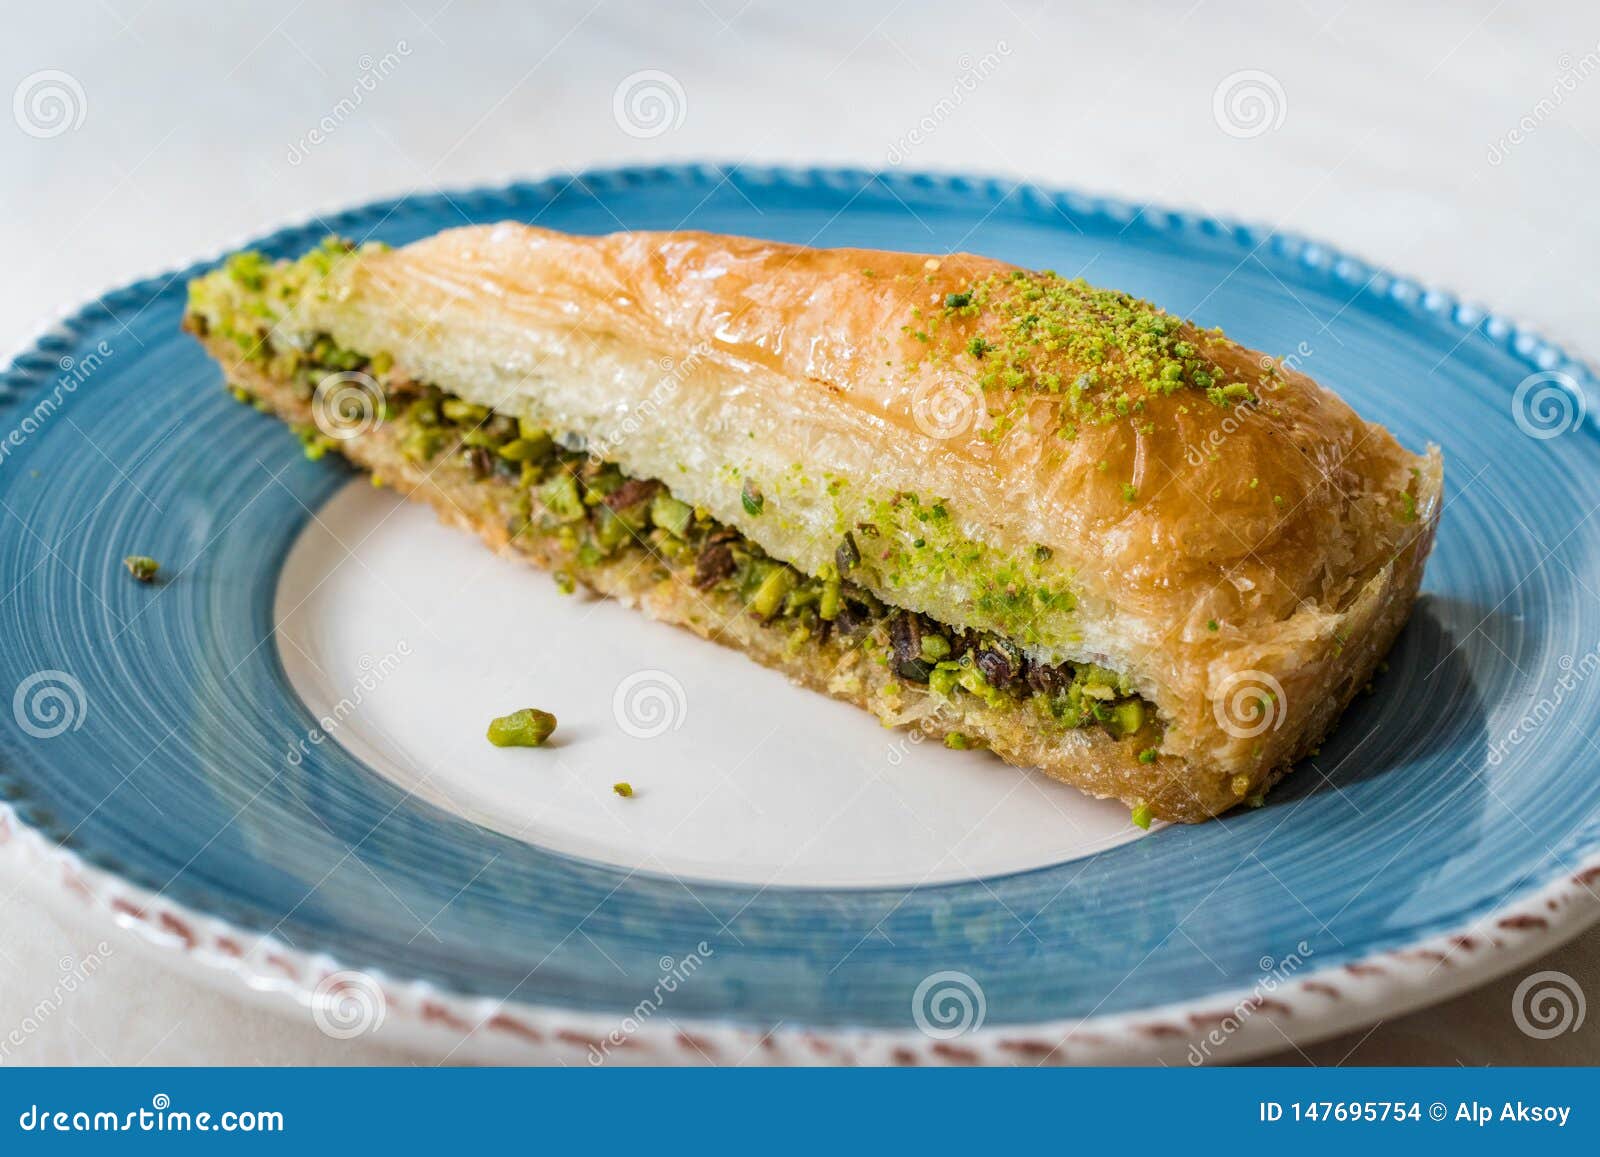 Turkish Baklava With Pistachio Served With Plate Havuc Dilimi Stock